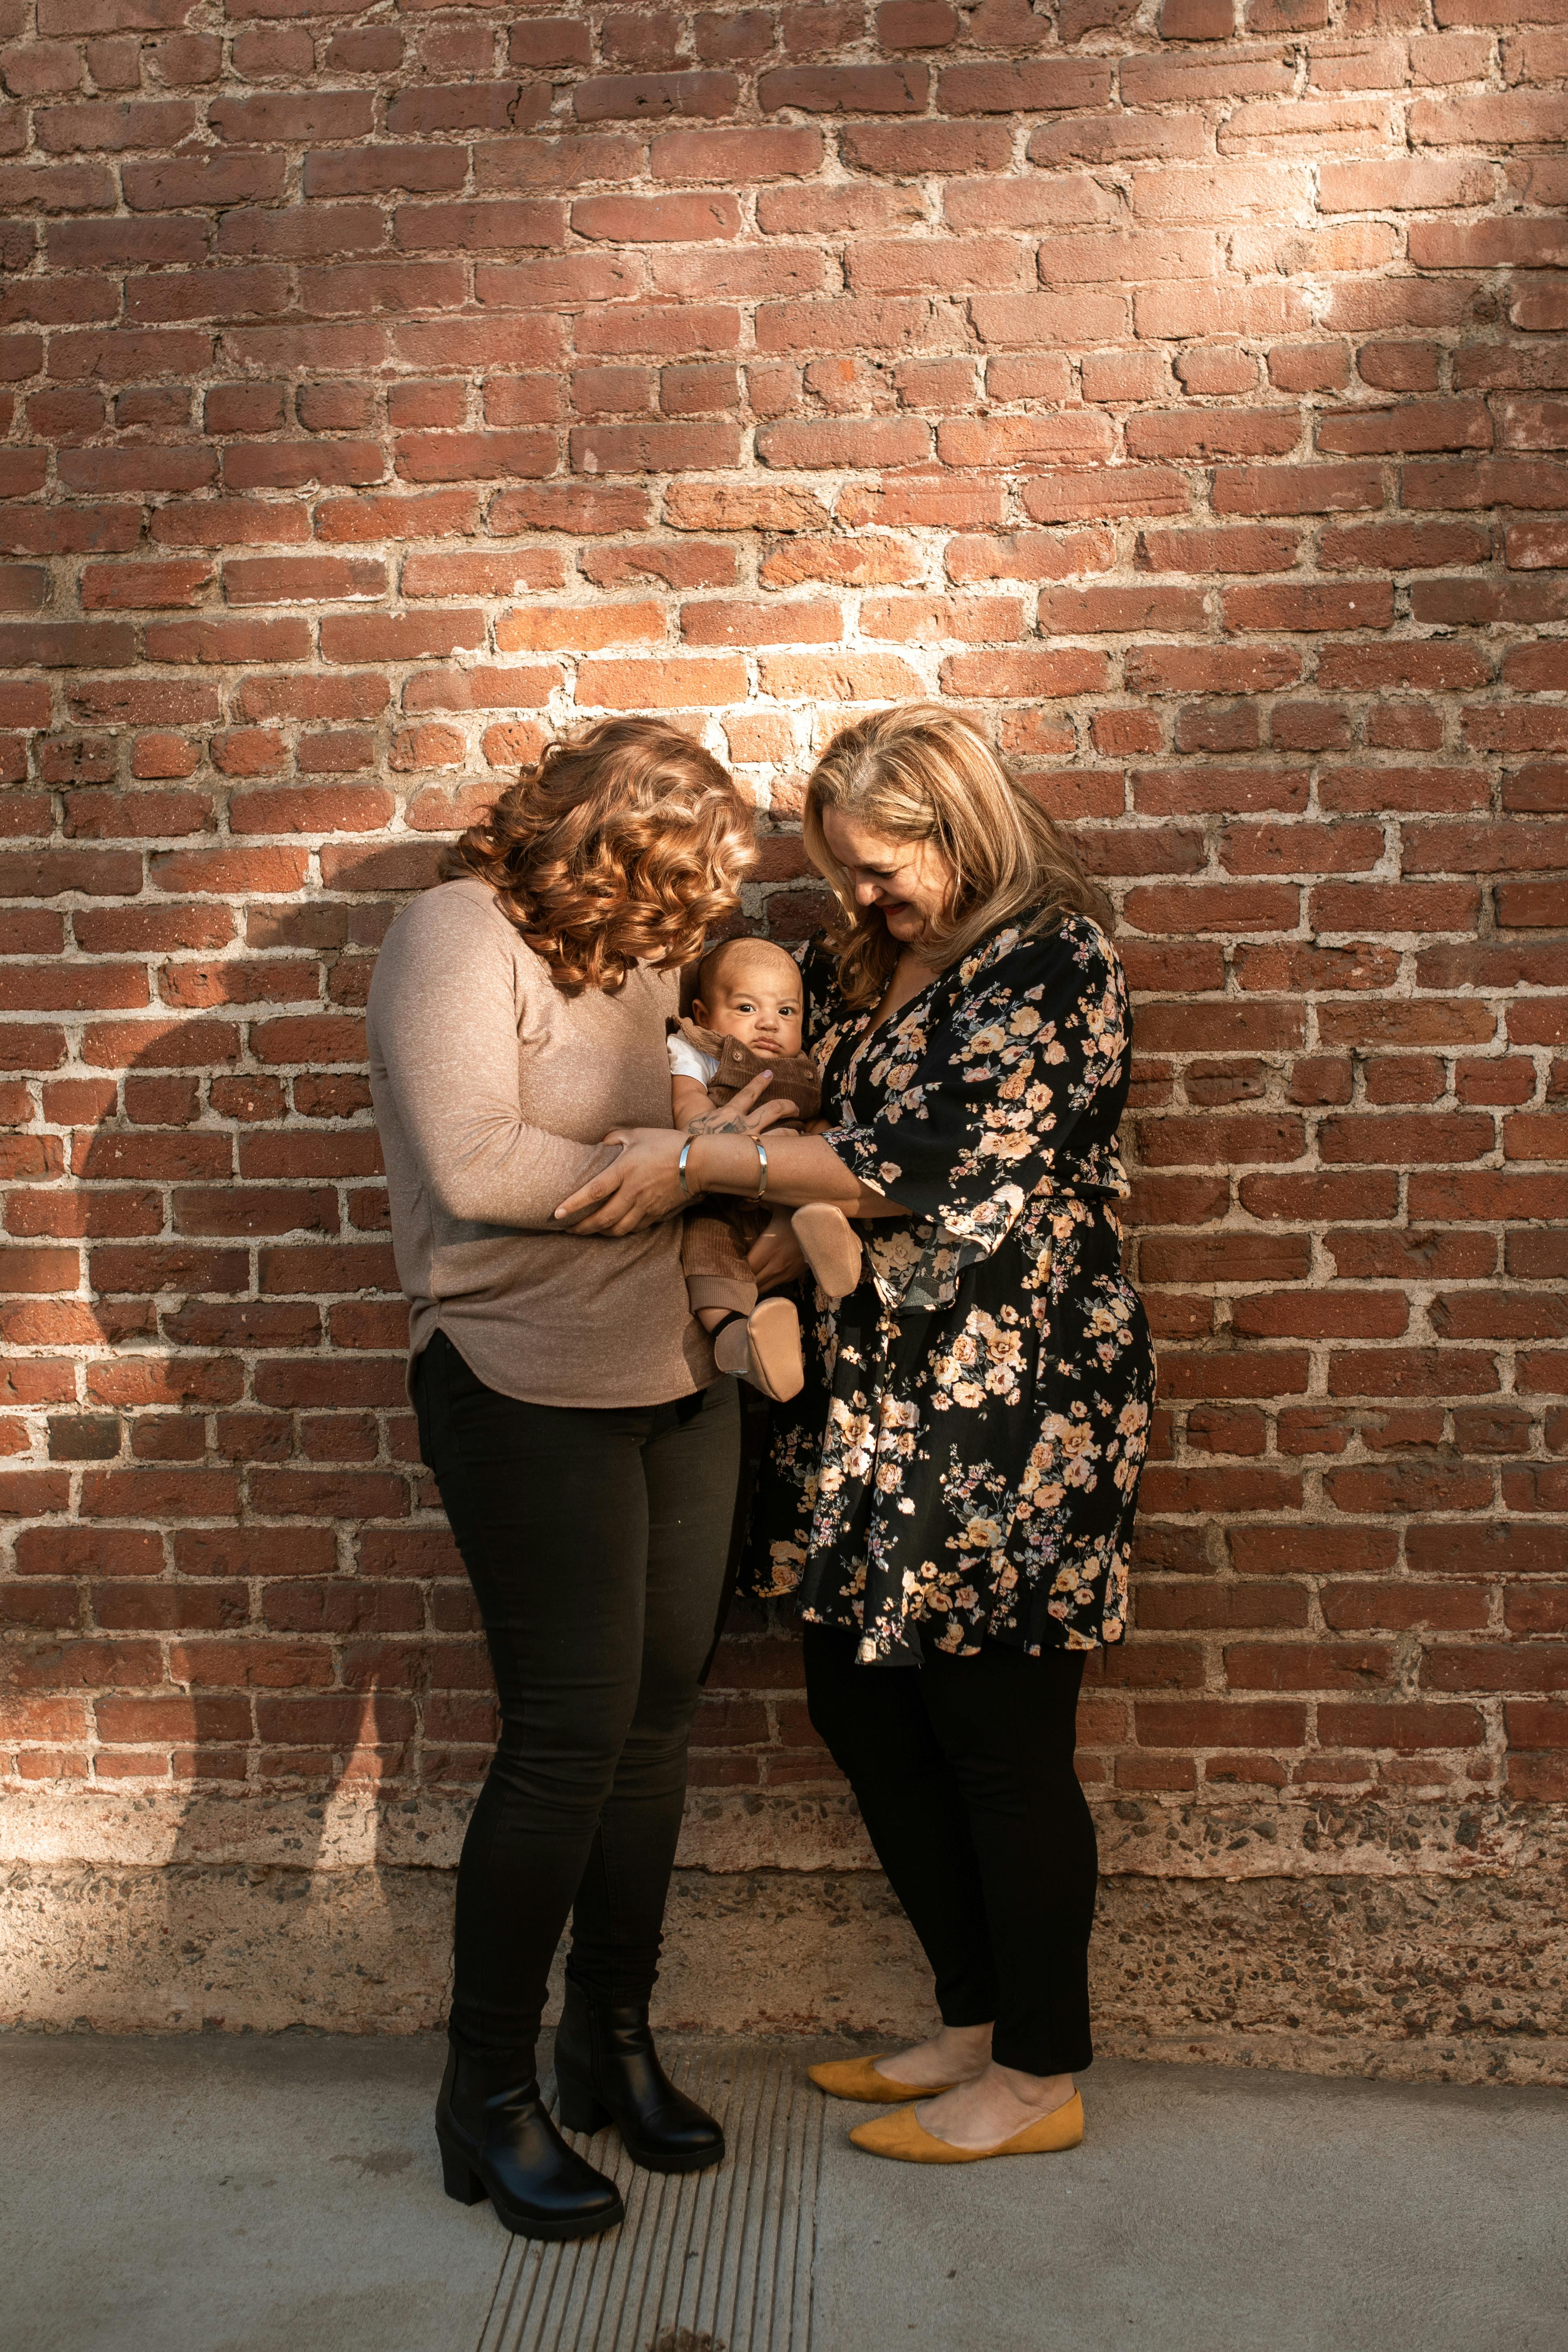 two women standing beside brick wall holding a baby